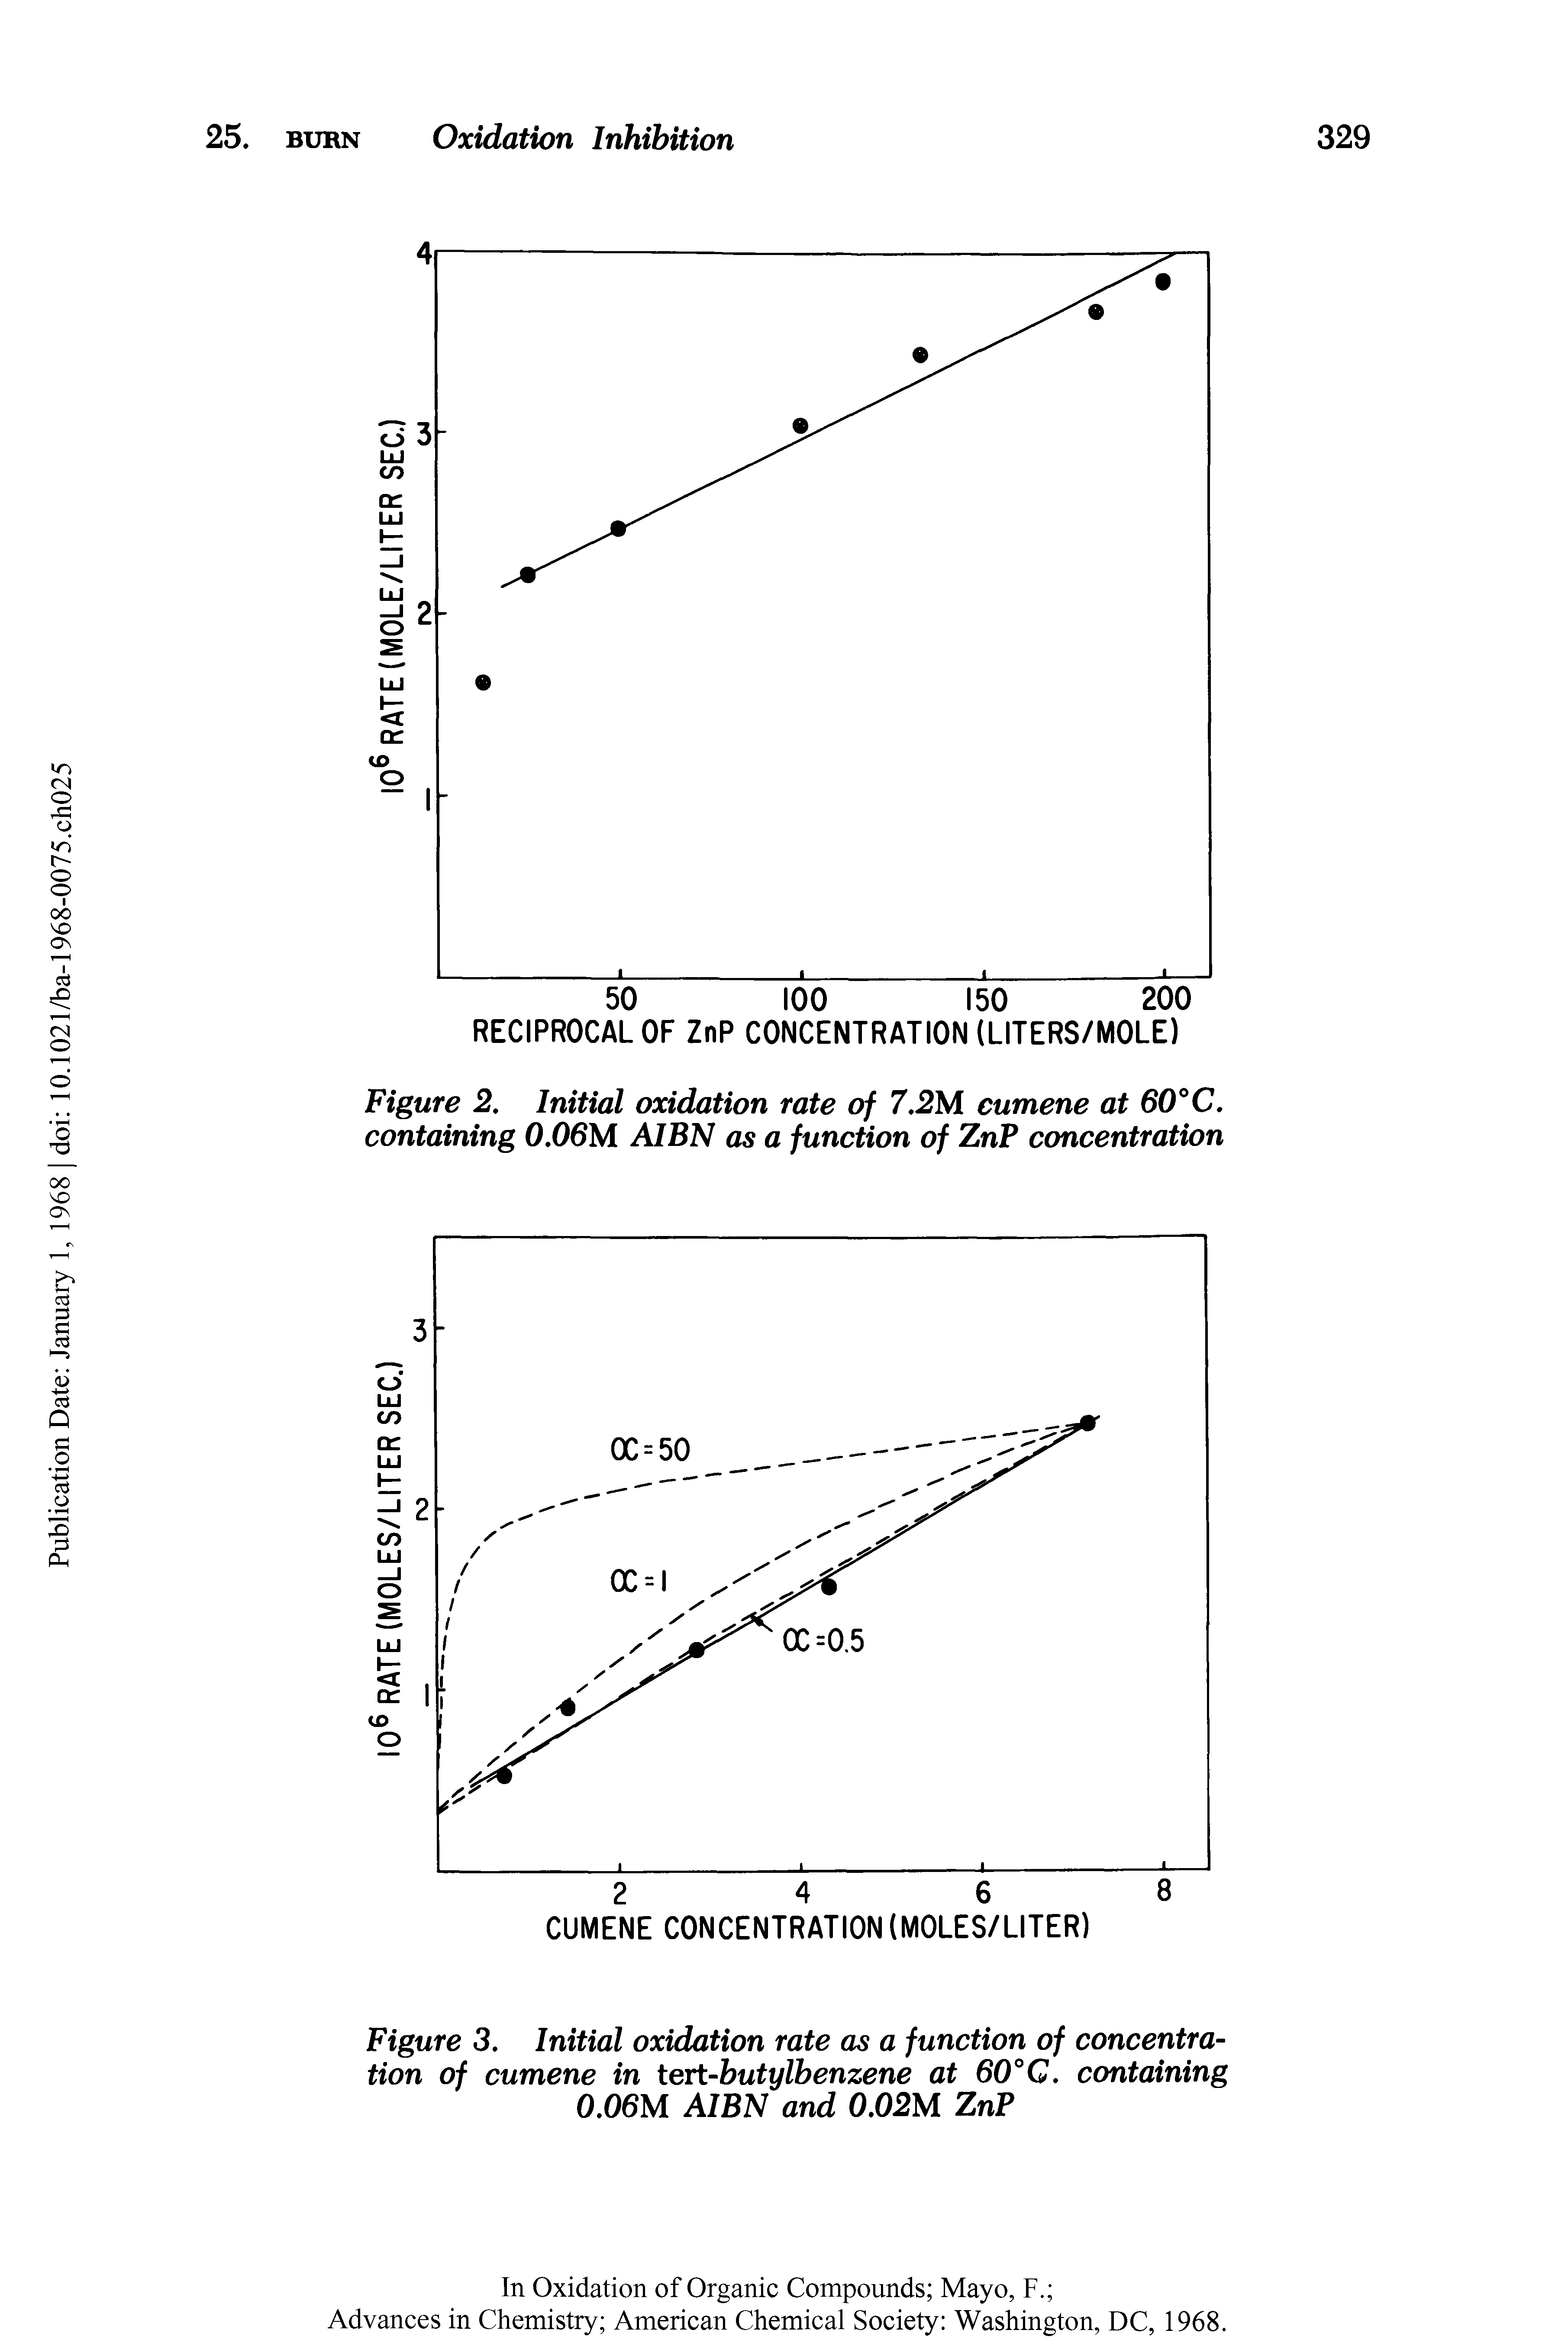 Figure 3. Initial oxidation rate as a function of concentration of cumene in tert-butylbenzene at 60°G. containing 0.06M AIBN and 0.02M ZnP...